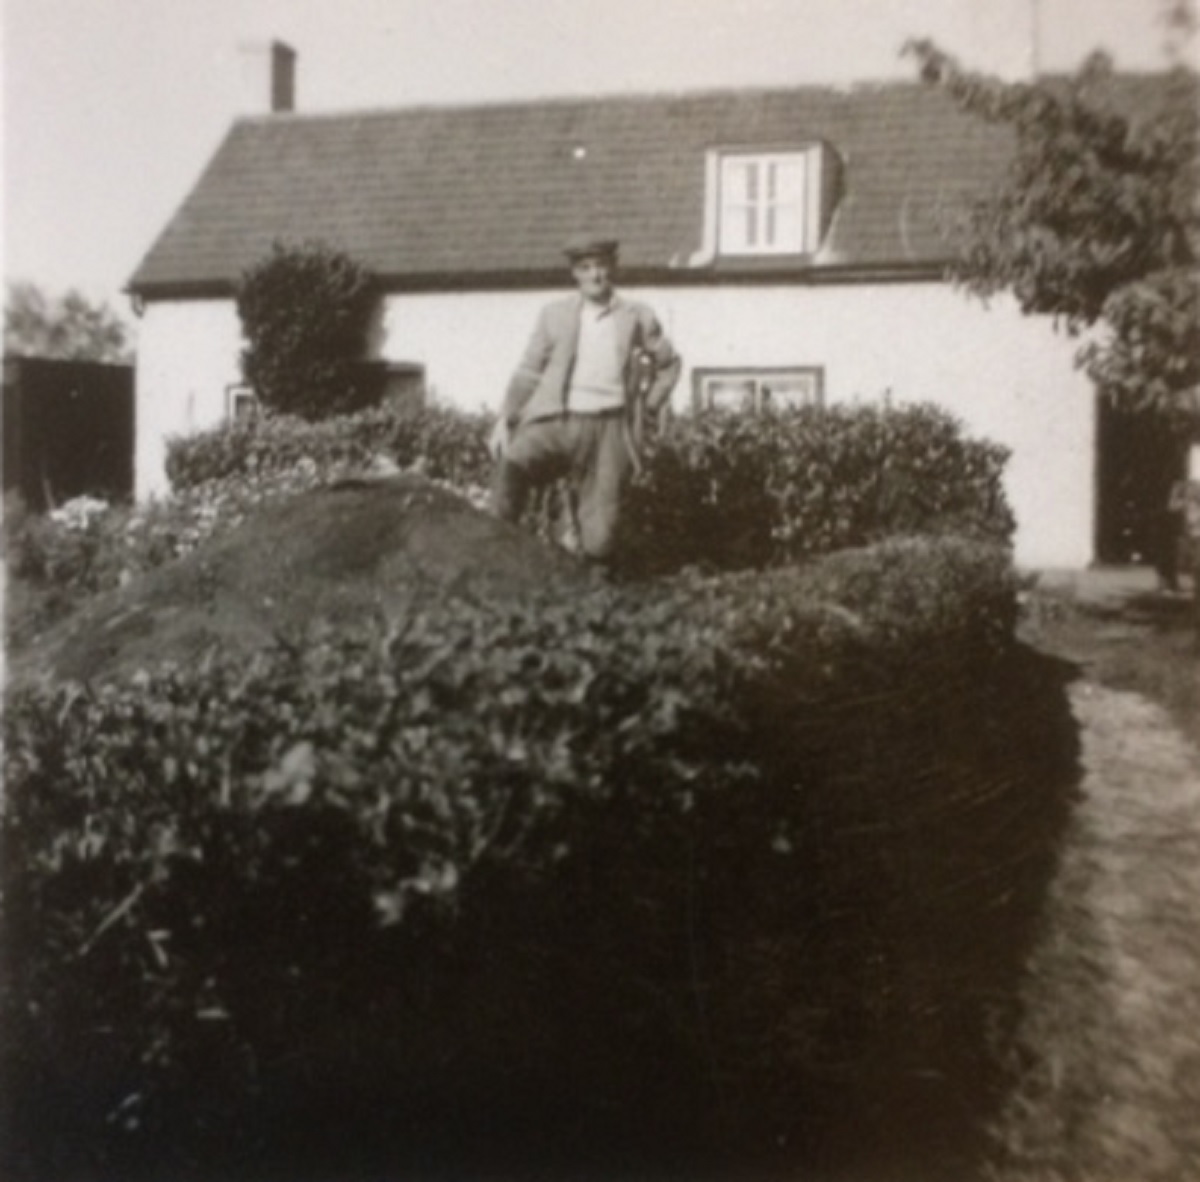 Home territory - Peakfield Cottage, in Ramsey, which was the home of Alfred Button in the 1950s